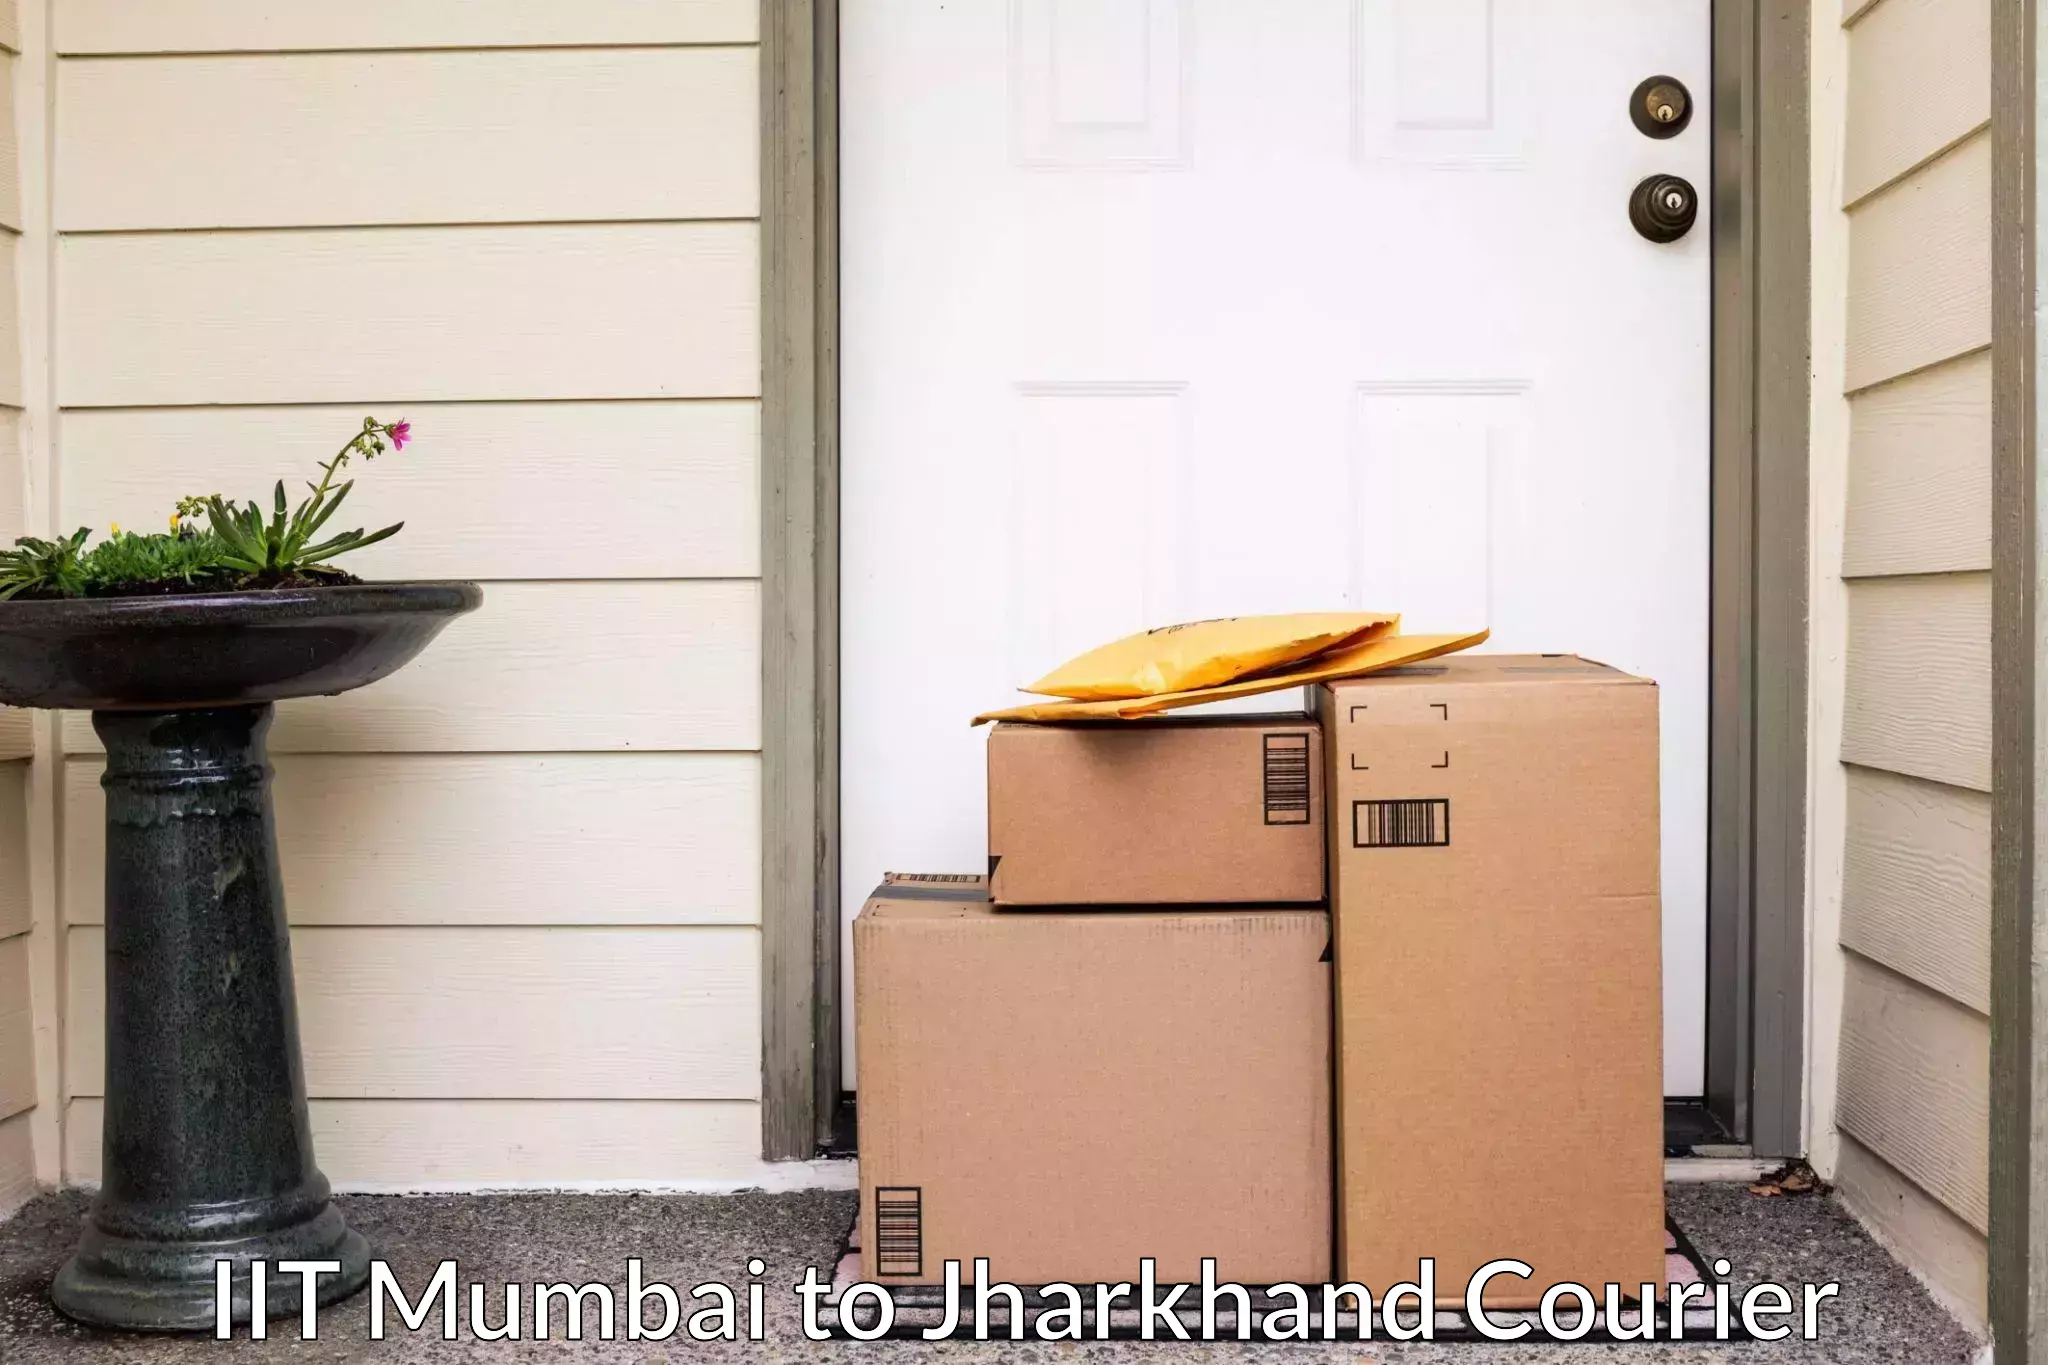 Reliable relocation services IIT Mumbai to Dhanbad